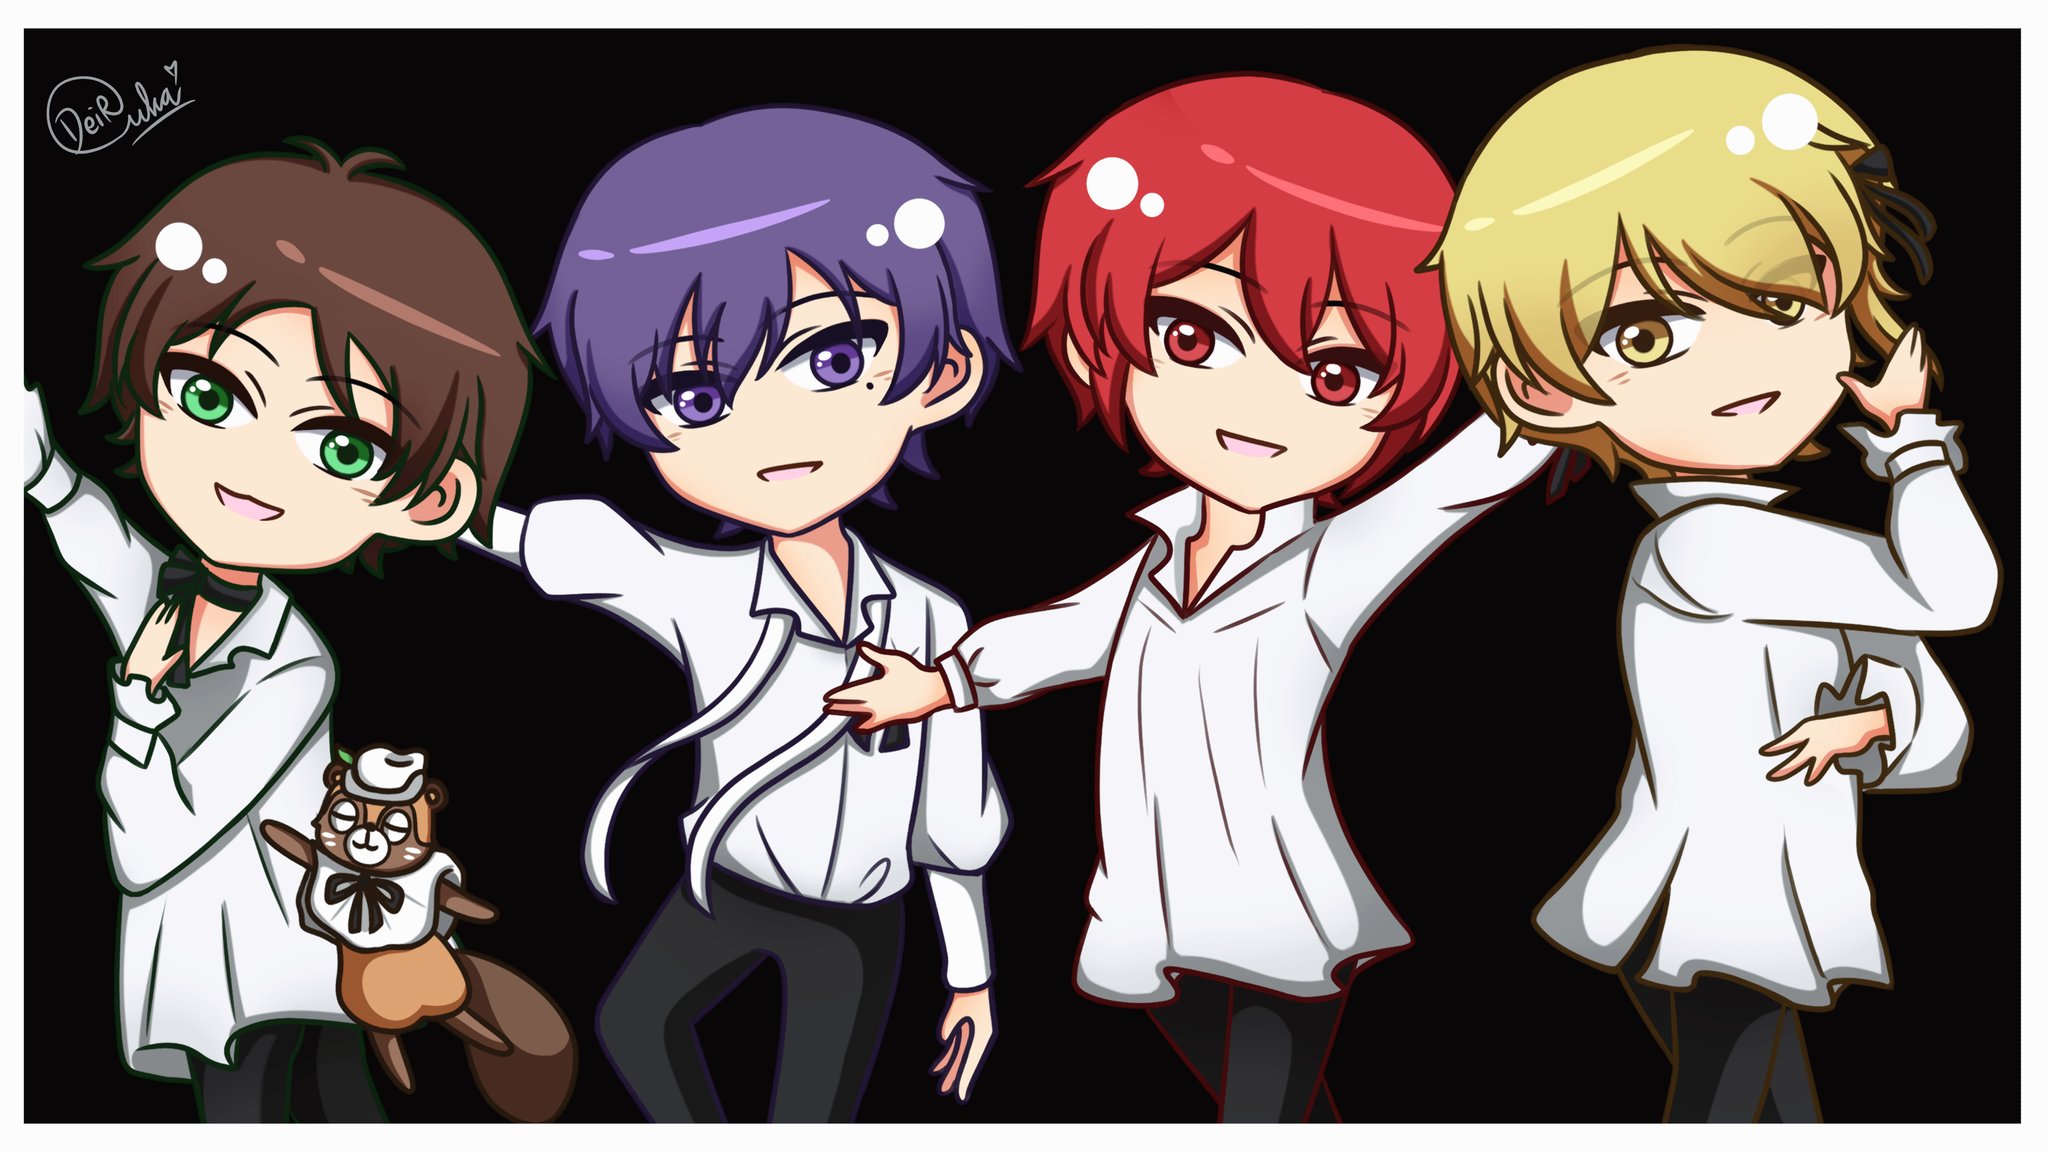 Deiru This Is It Chibi Usss フランマ Flamma Edition I Really Want To Buy Their New Album But I Can T Just Seeing Them On Yt Is Enough I Think